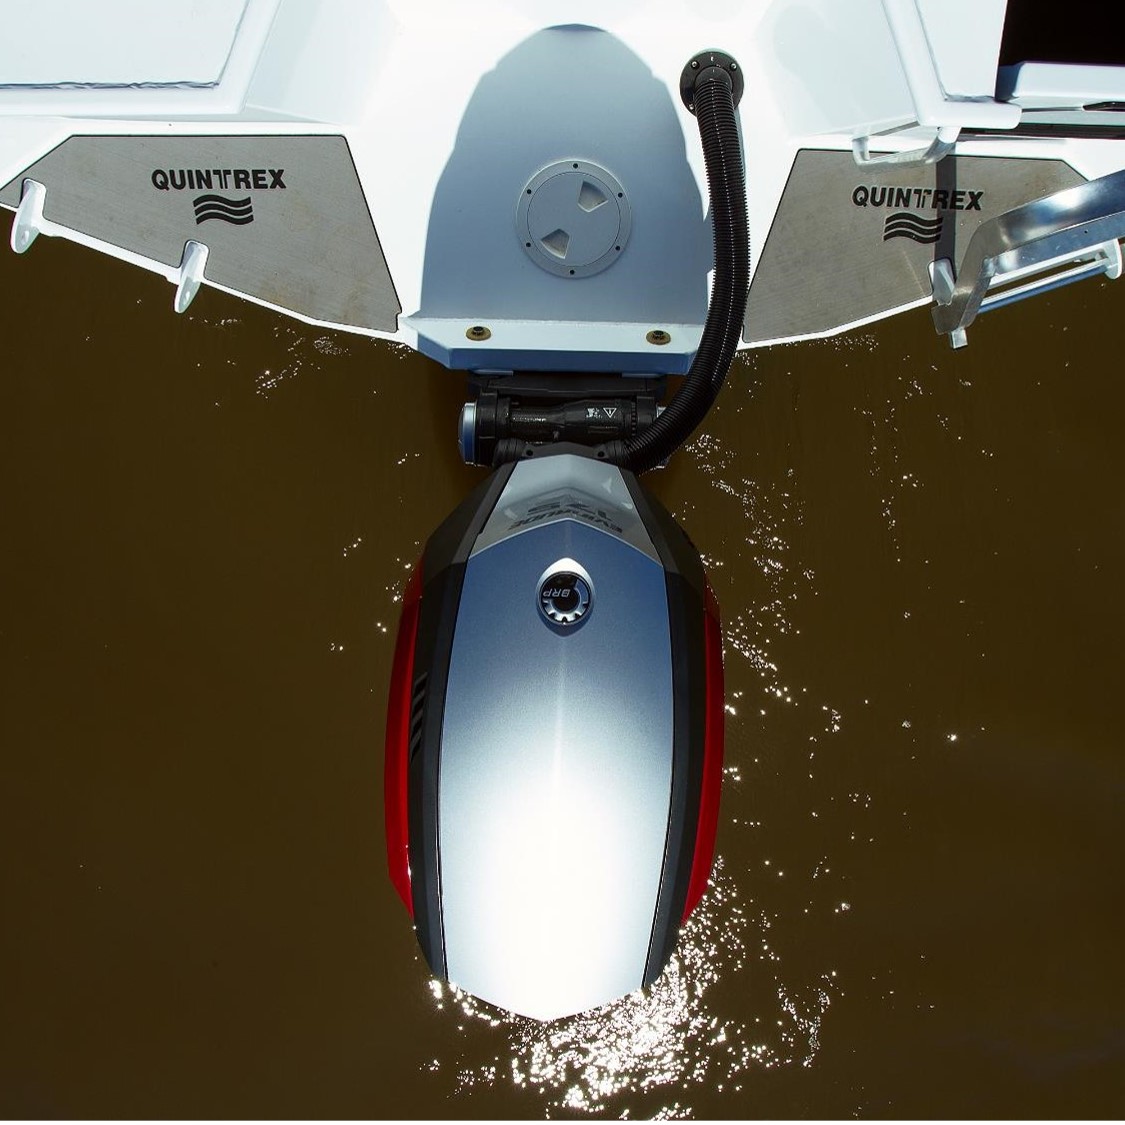 Evinrude’s iSteer and iTrim